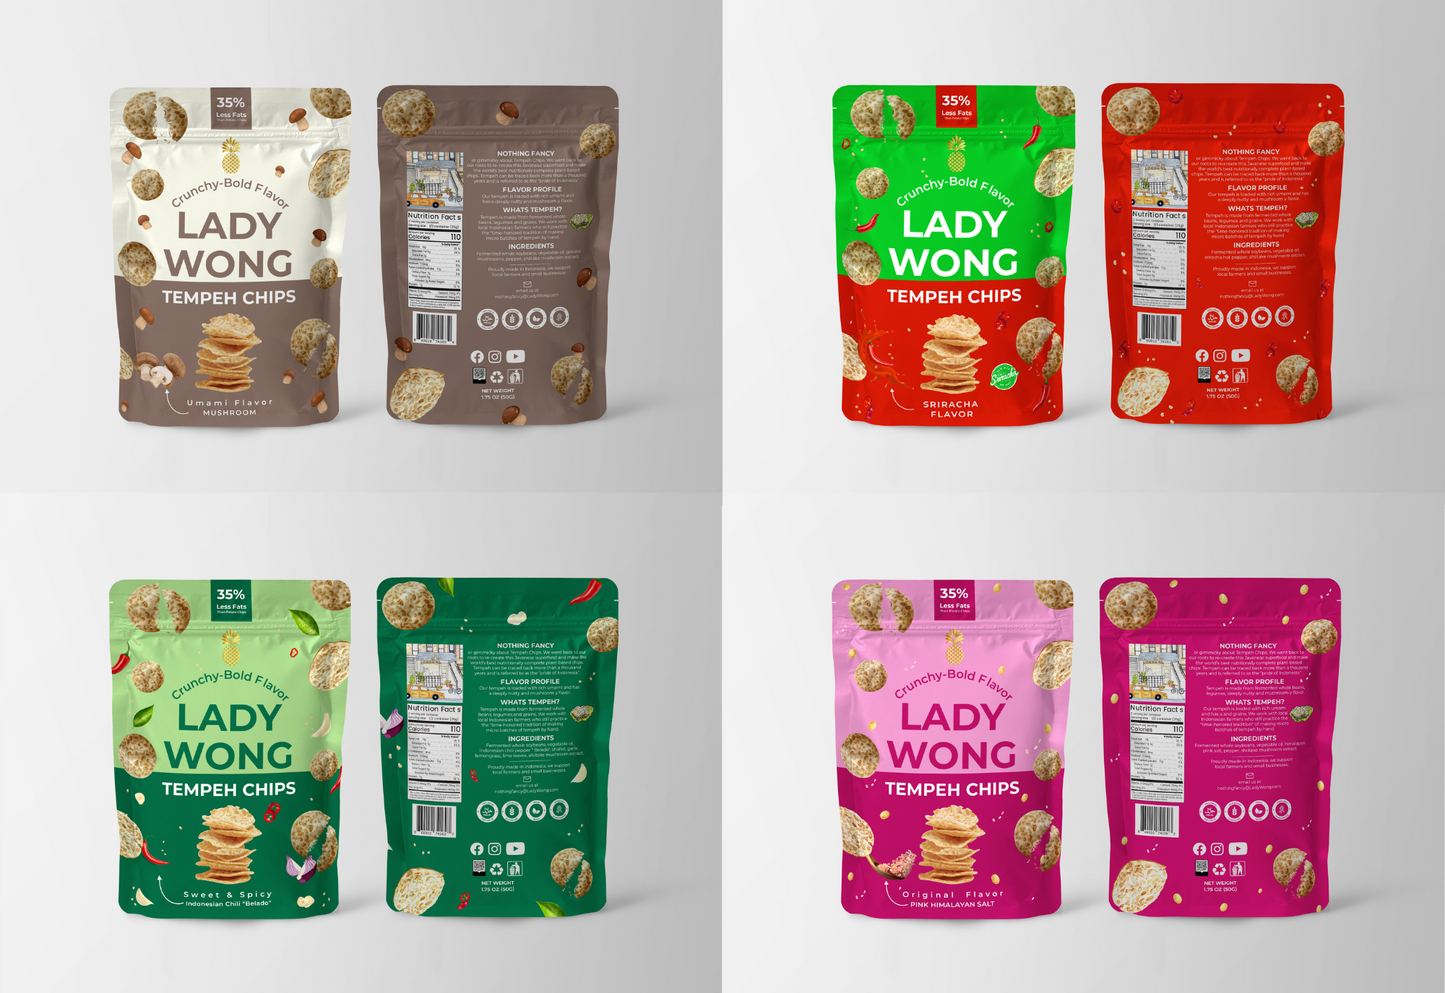 Lady Wong Protein Chip Sampler - 24 Pack